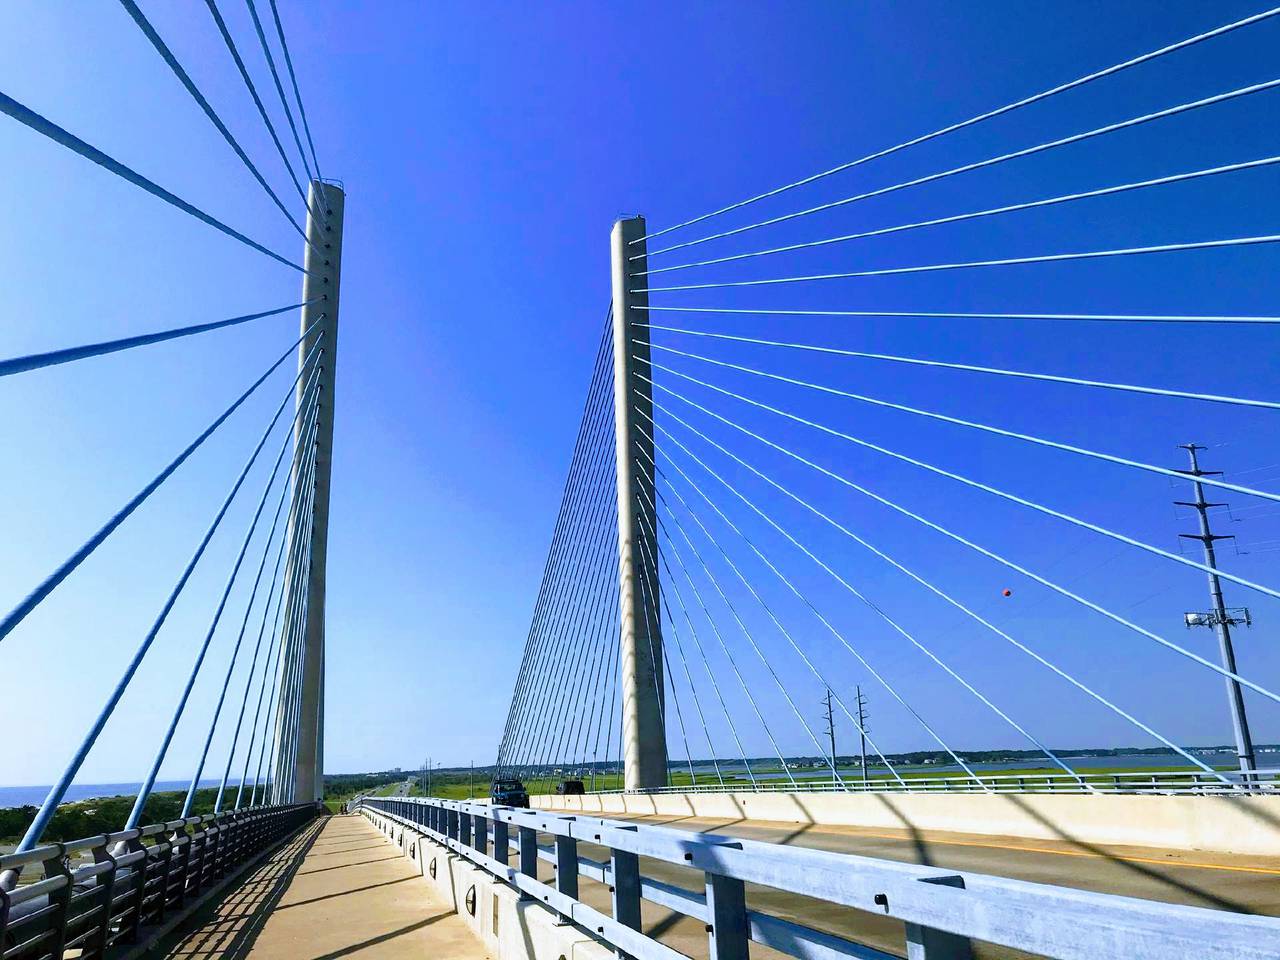 The Charles W Cullen Bridge near Bethany Beach, Delaware, is a cable swayed bridge over the Indian River Inlet that includes paths for walking and biking as well as cars and trucks.